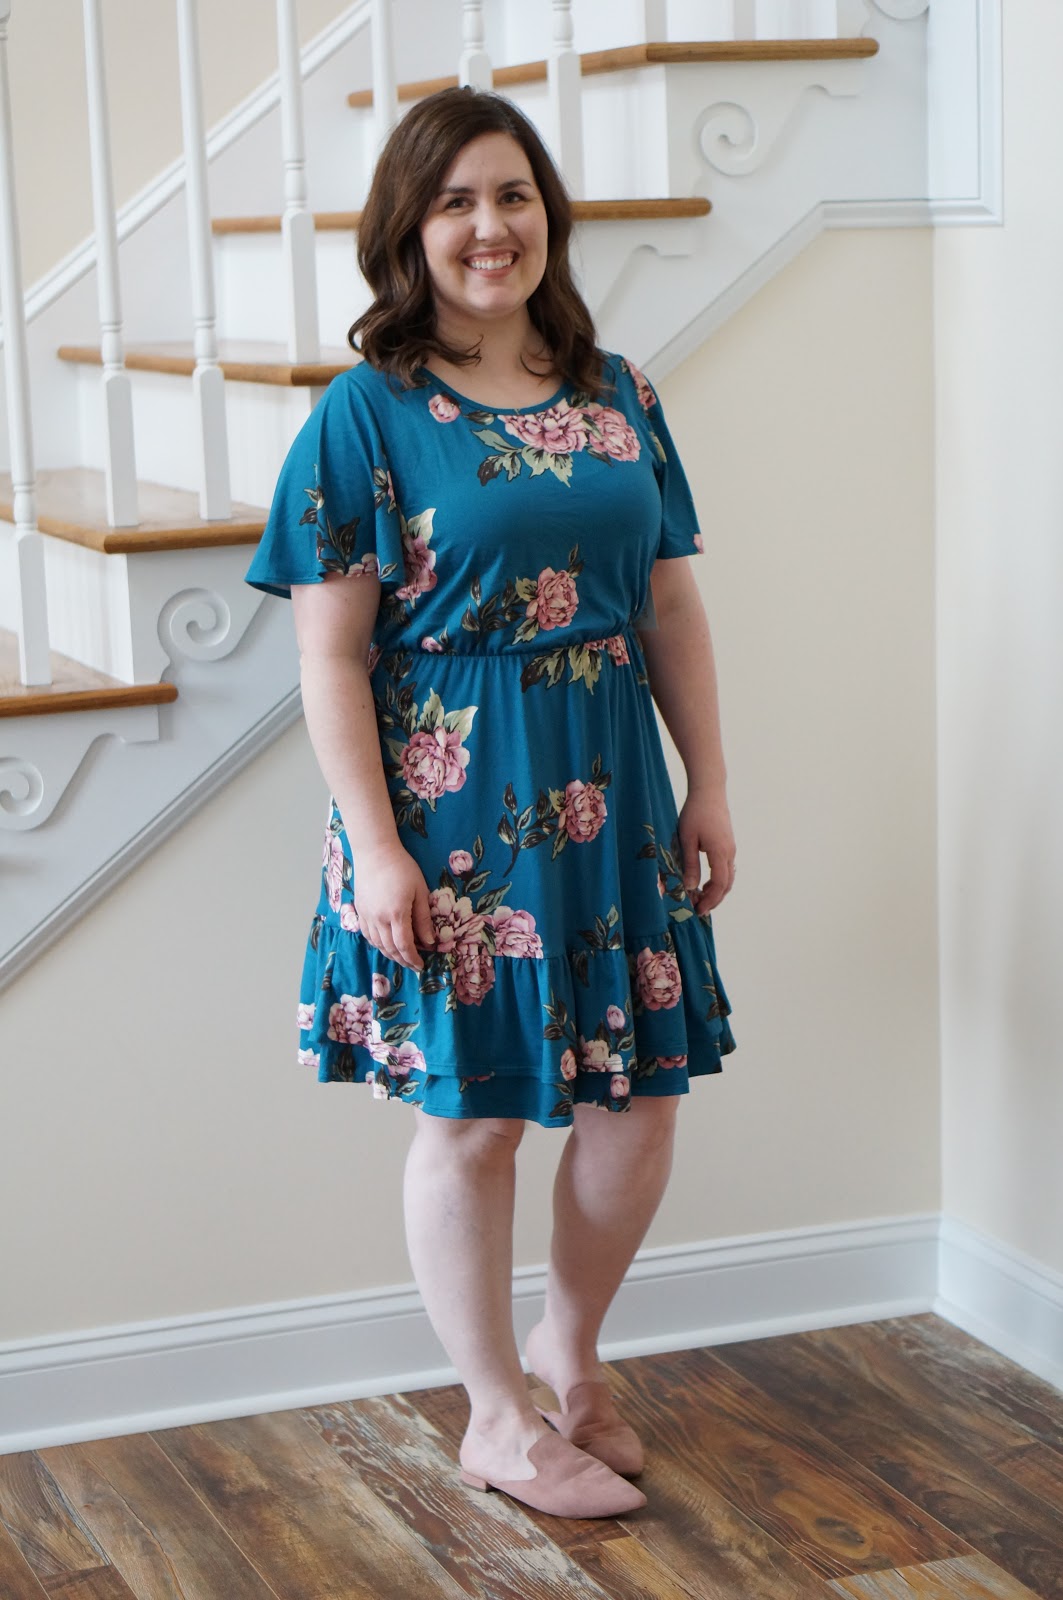 STITCH FIX REVIEW | MARCH 2018 OUTFITS - Rebecca Lately